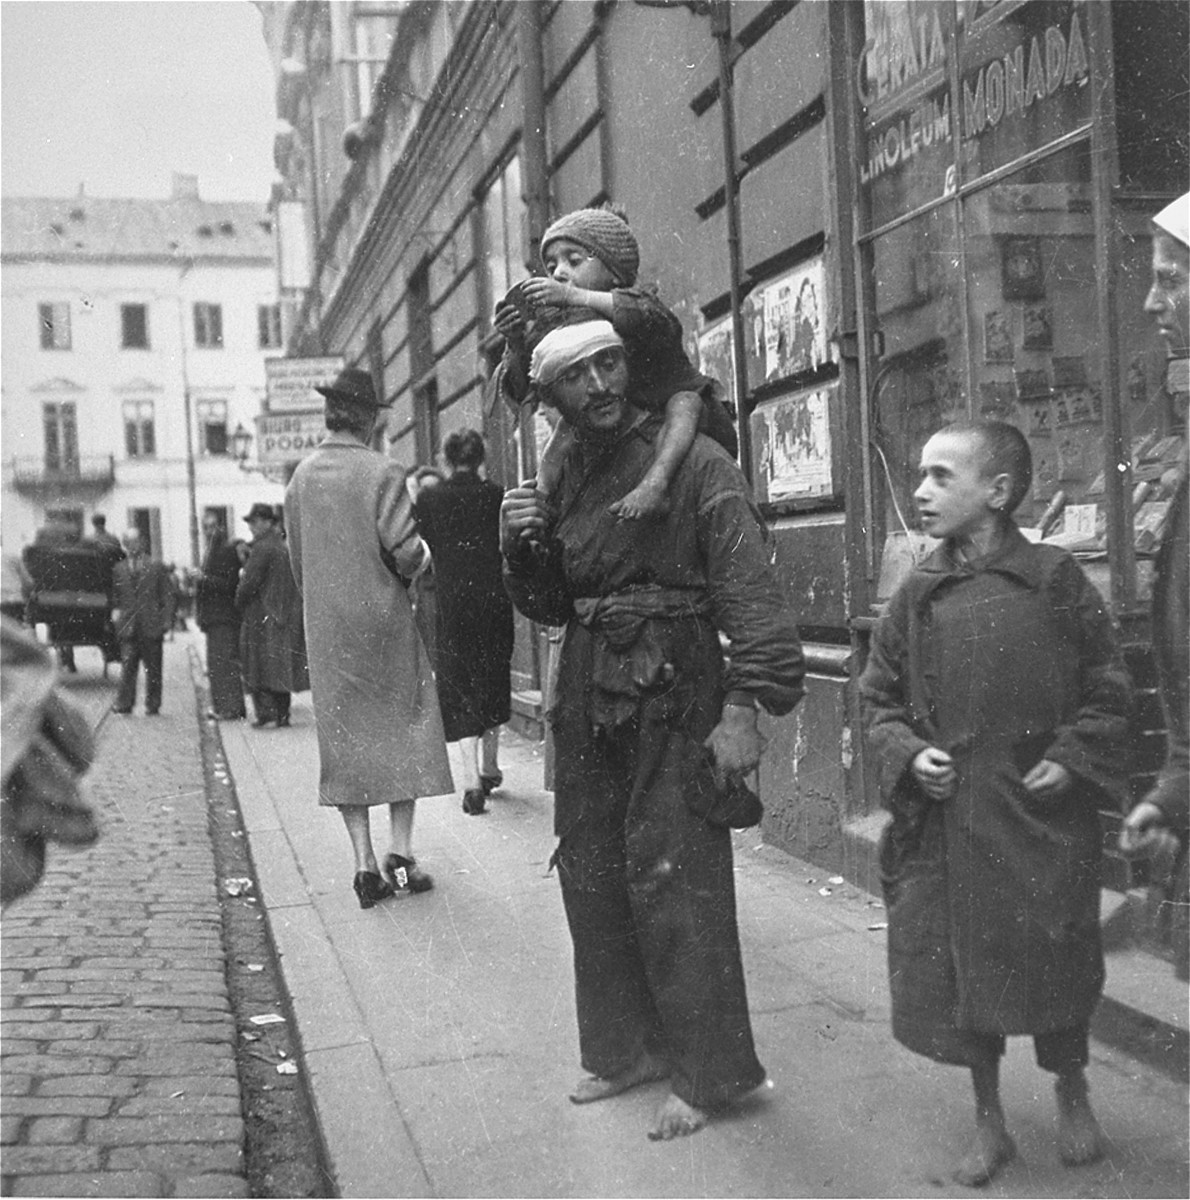 A destitute Jewish man with his two children on a street in the Warsaw ghetto. 

Joest's original caption reads: "Next to a lady with a good coat and shoes that had heels, stood next to this broken-down man, barefoot, with his barefoot child on his shoulders."